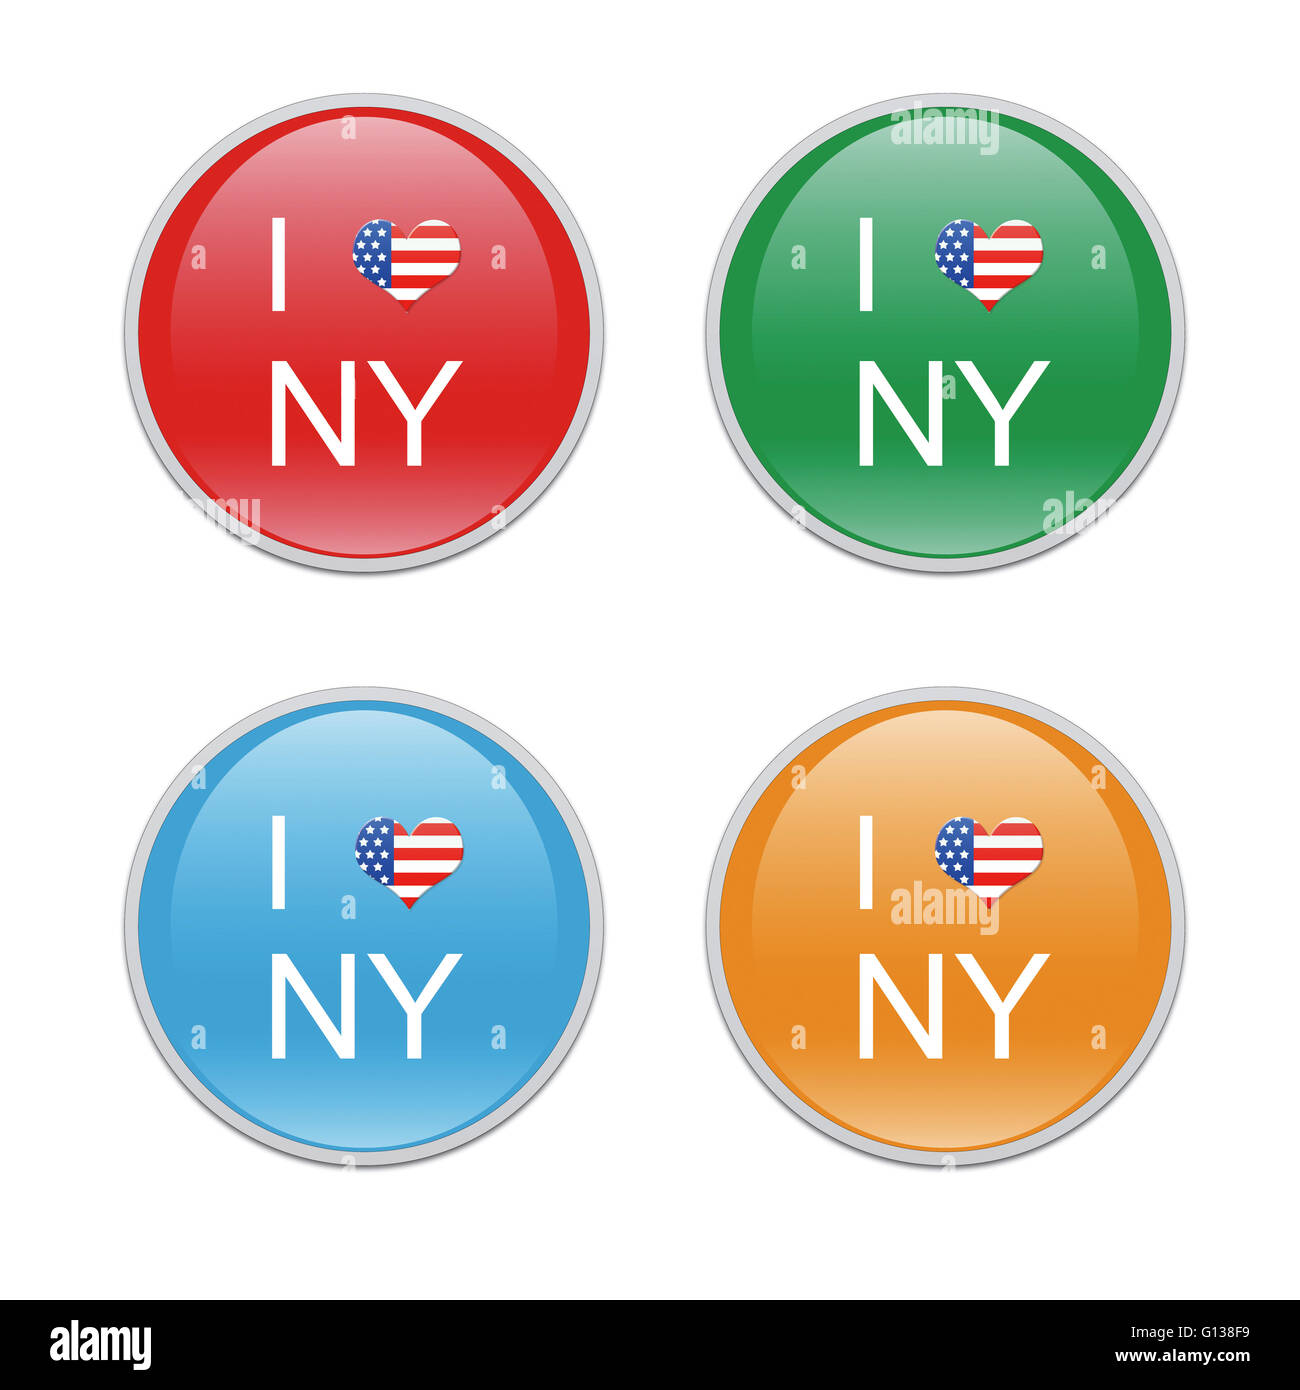 Set of rounded icons to symbolize I Love NY, New York in red, green, blue and orange colors Stock Photo